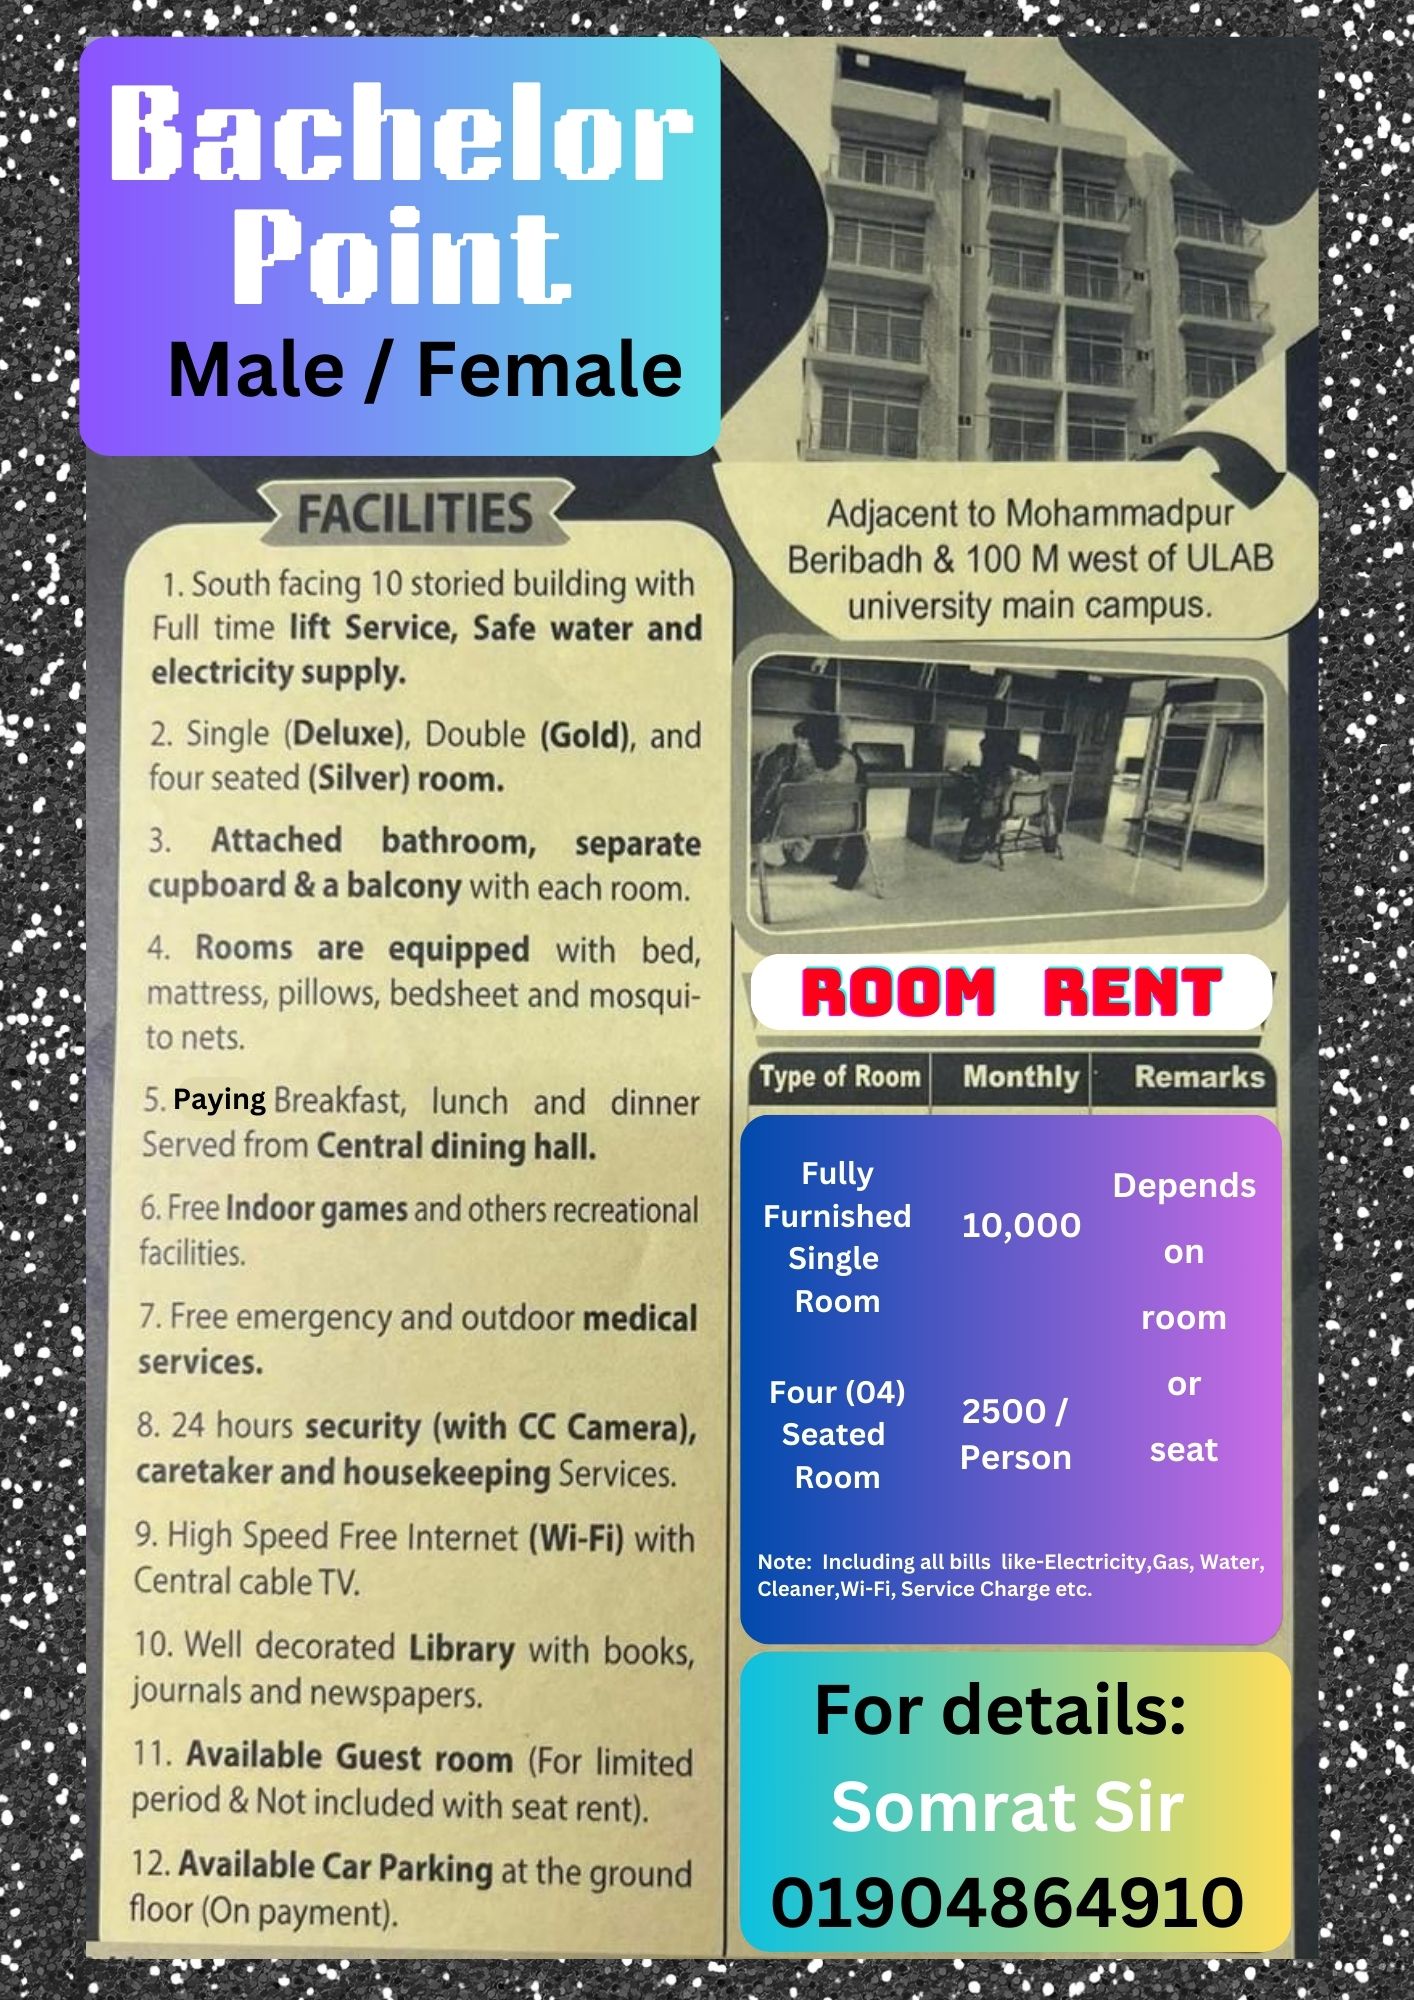 To-let in Bachelor point for Male / Female